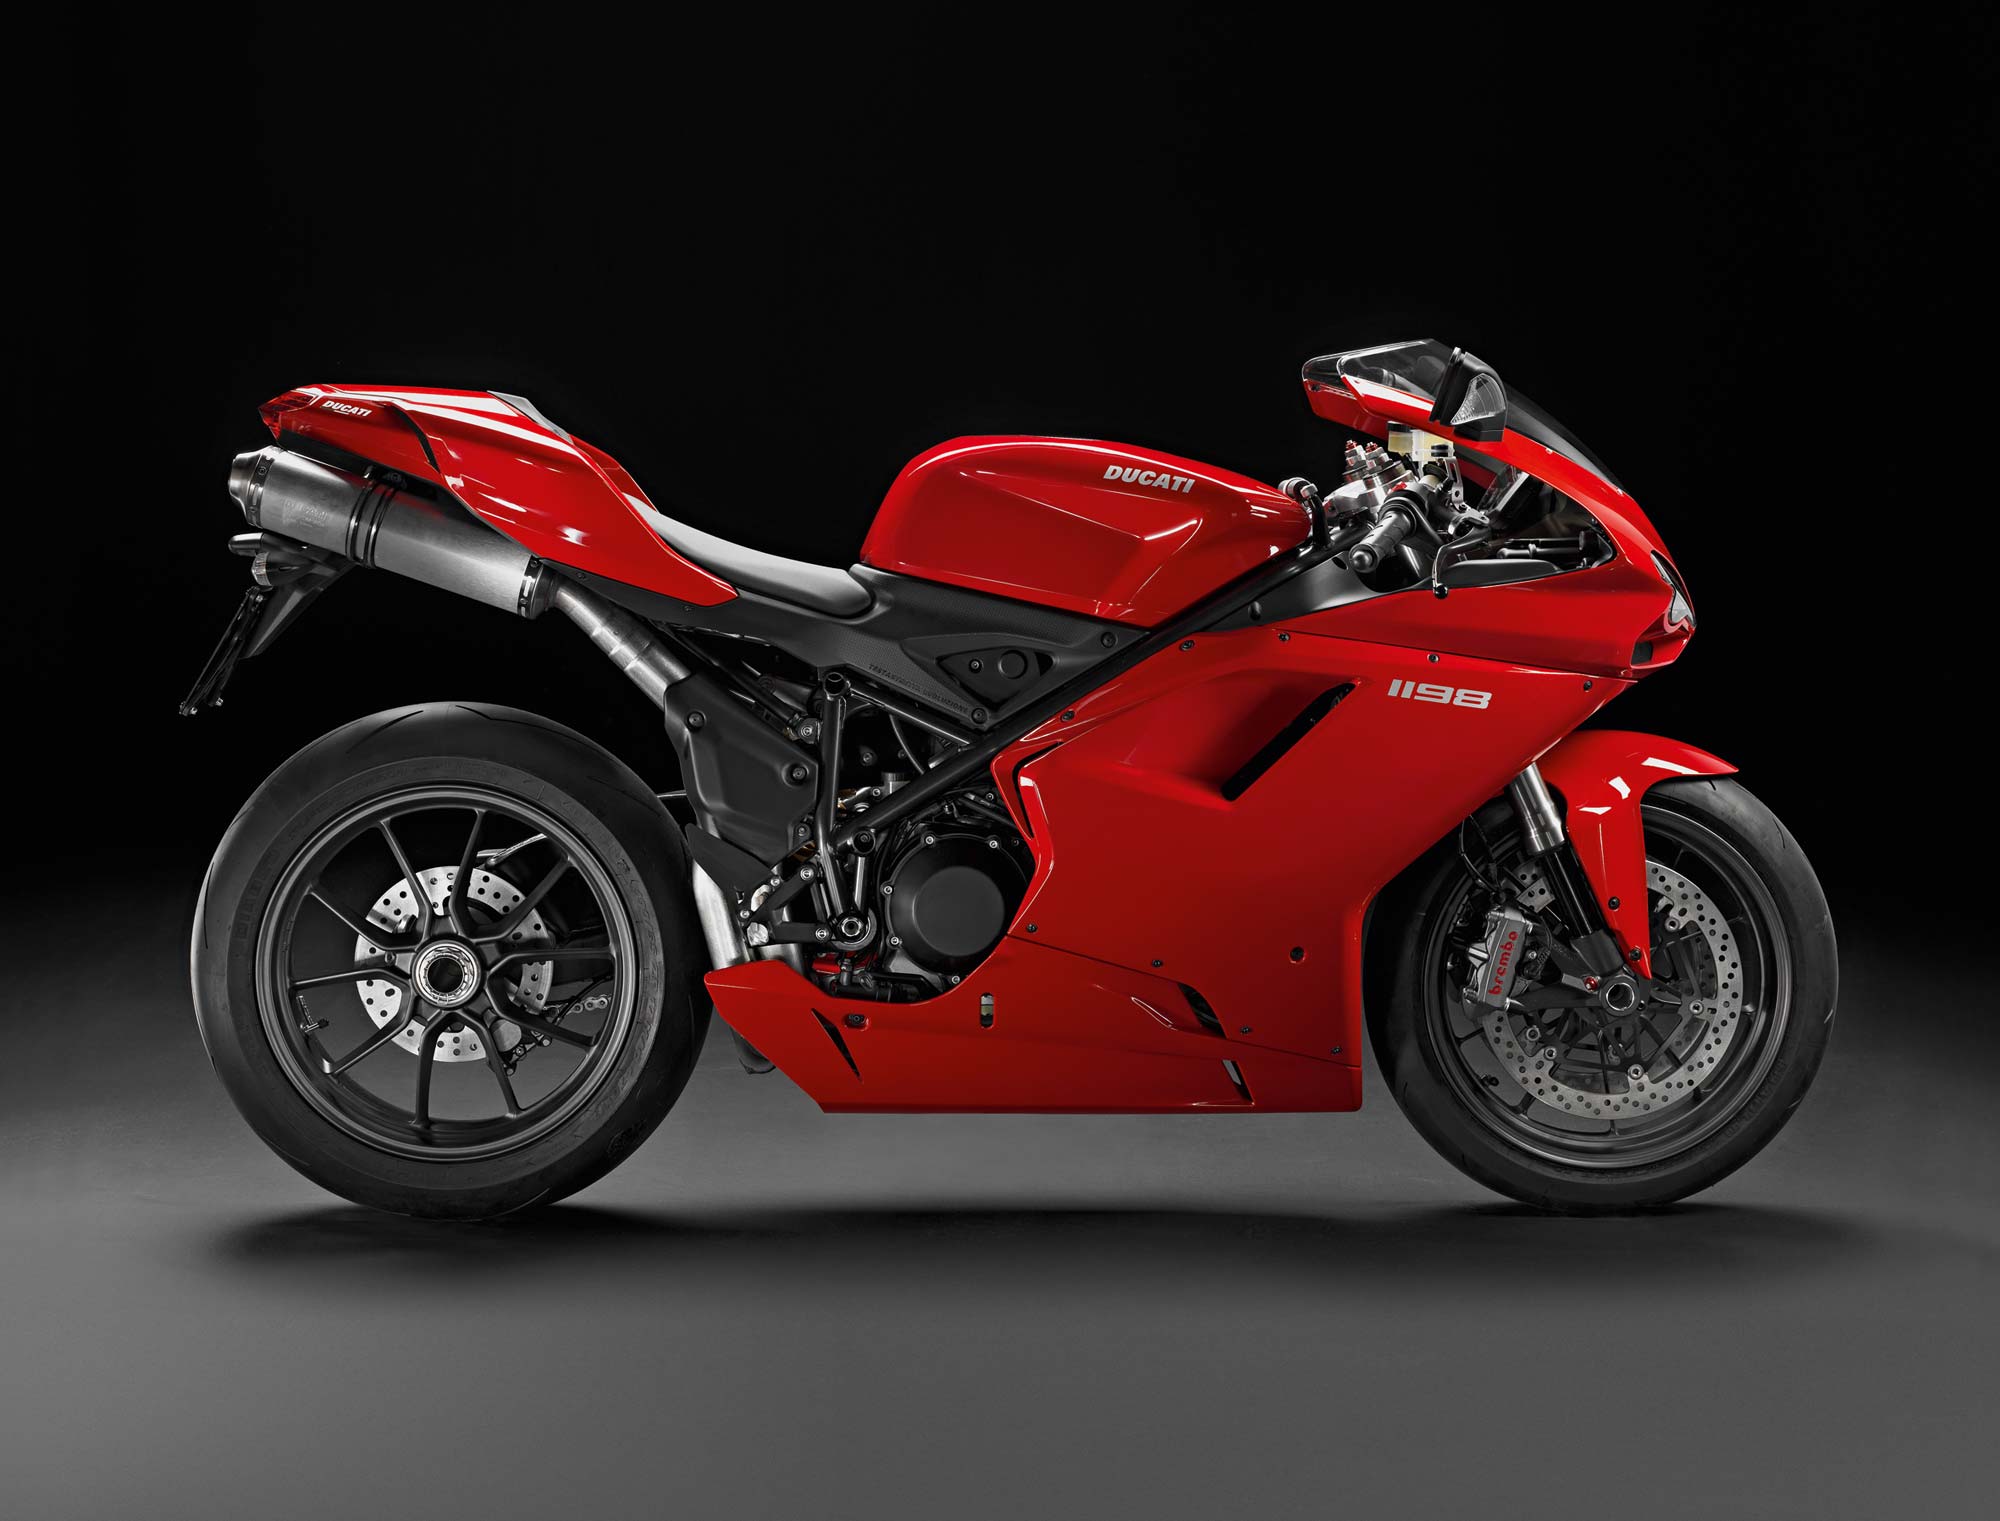 2011 Ducati Superbike 1198 Gets Free Traction Control, Data 